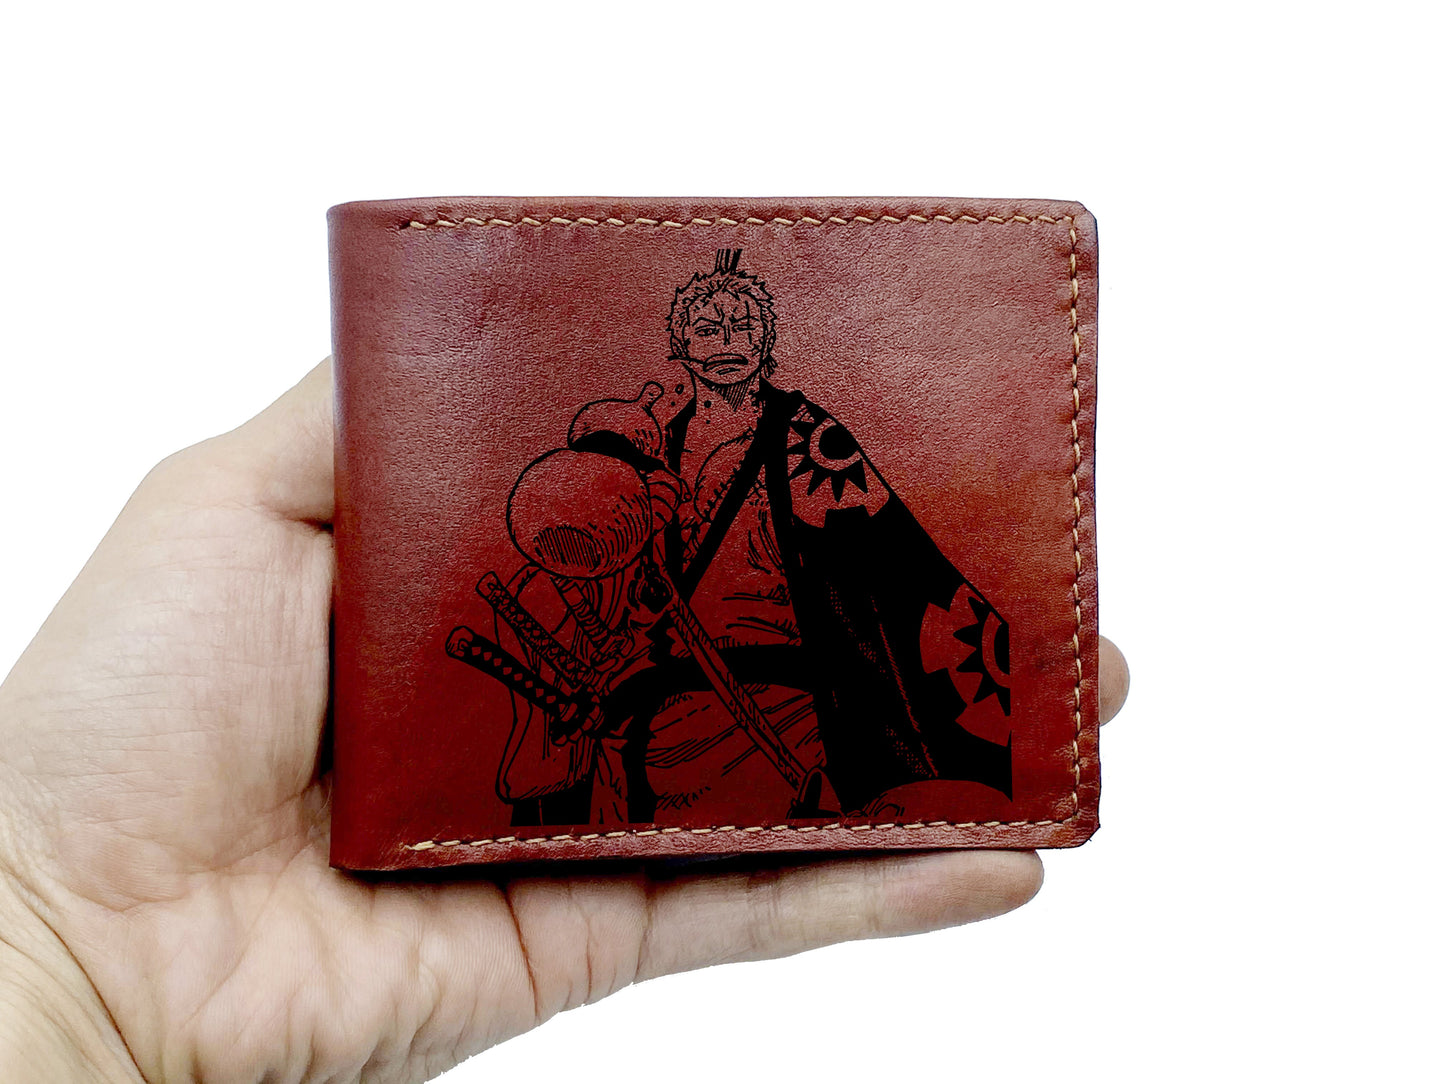 Mayan Corner - Personalized leather handmade wallet, One piece anime Japan leather gift, One piece pirate wallet for dad, boyfriend